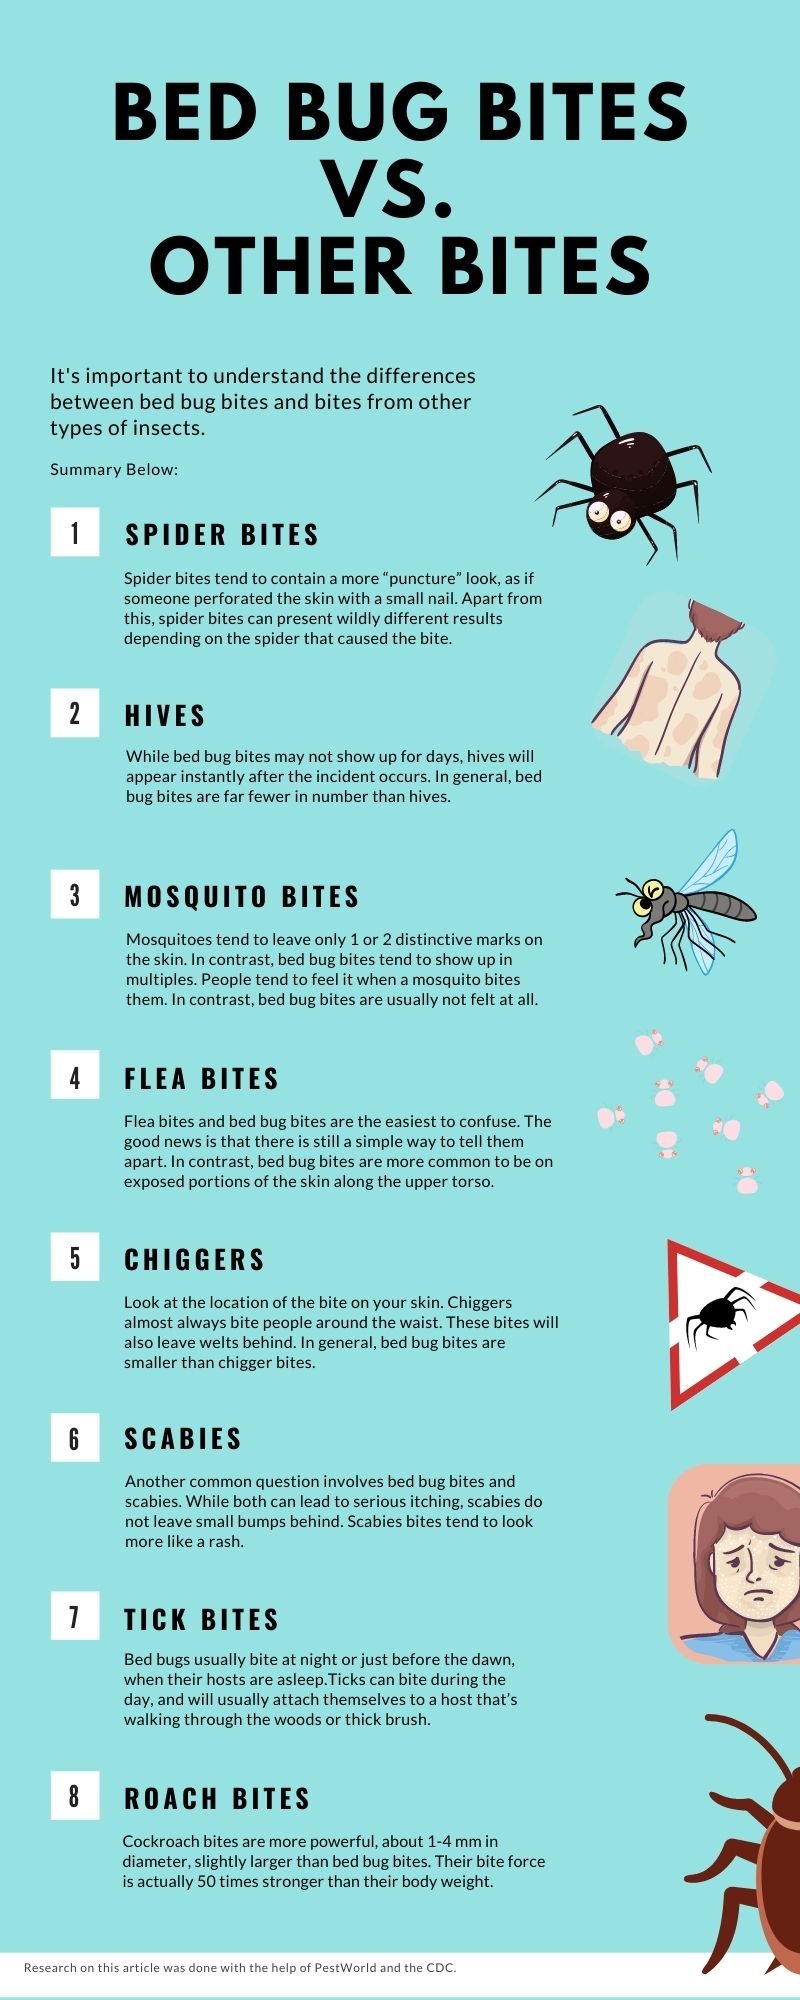 Bed Bug Bites Vs. Other Bites | Fleas, Hives, Chiggers [9+ Examples]